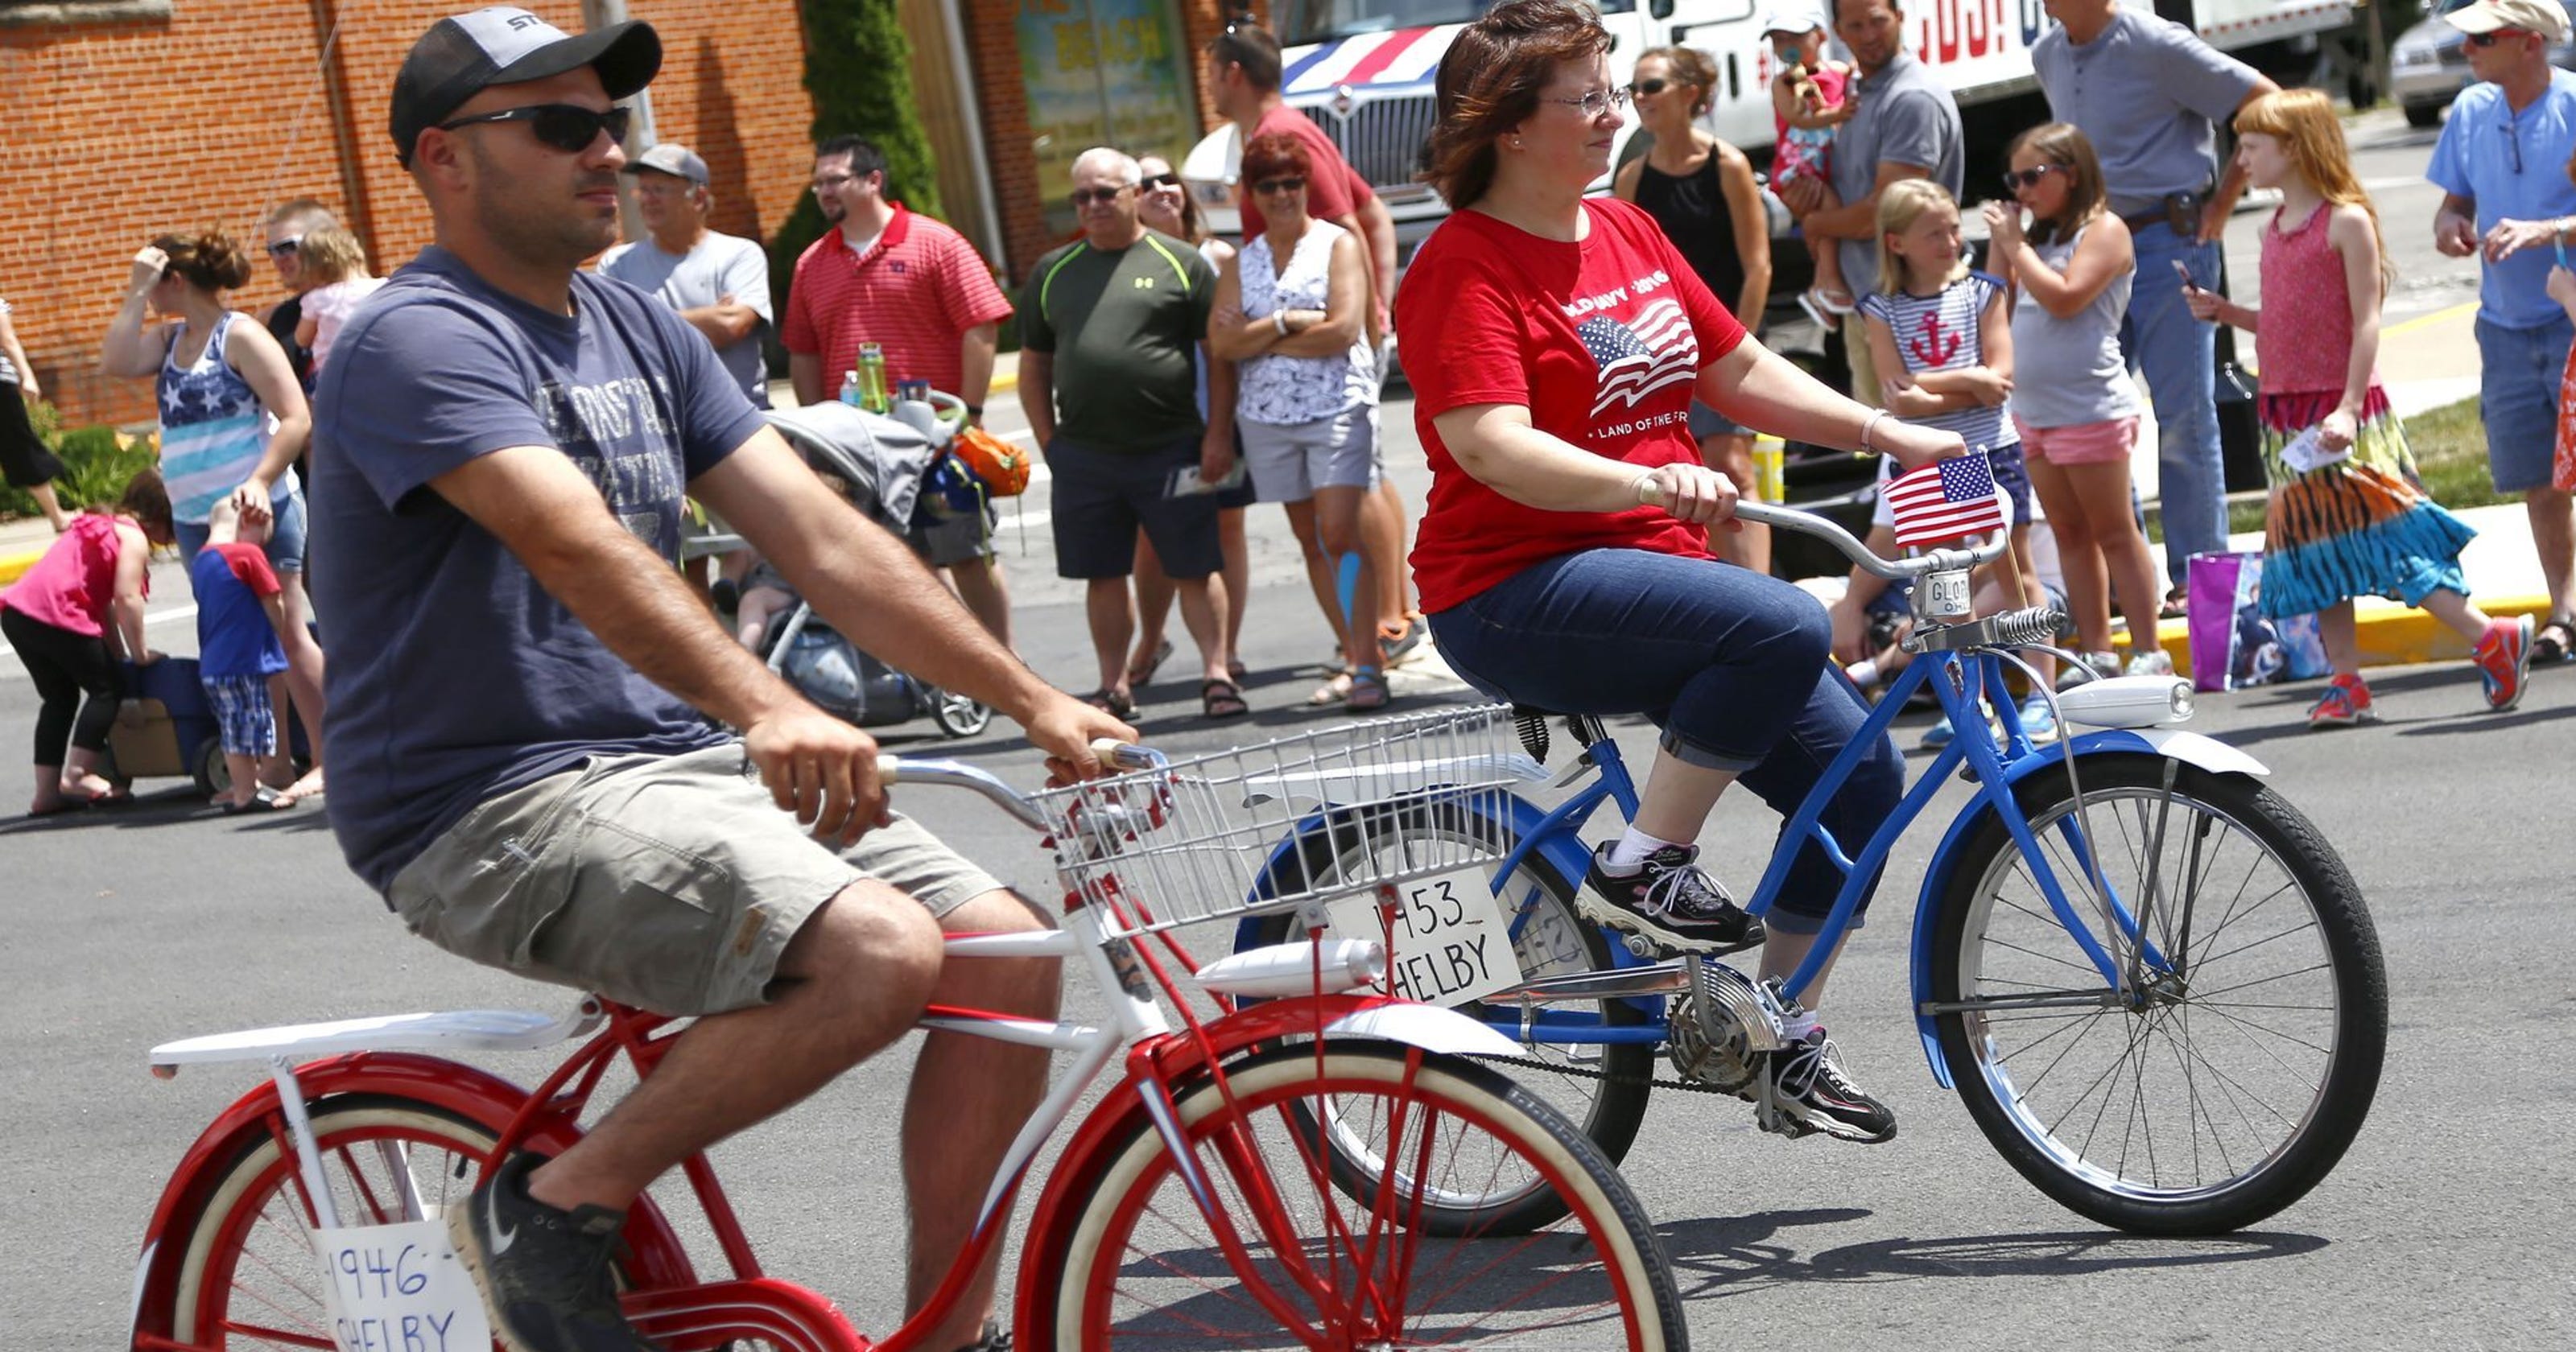 Shelby Bicycle Days return for 26th year